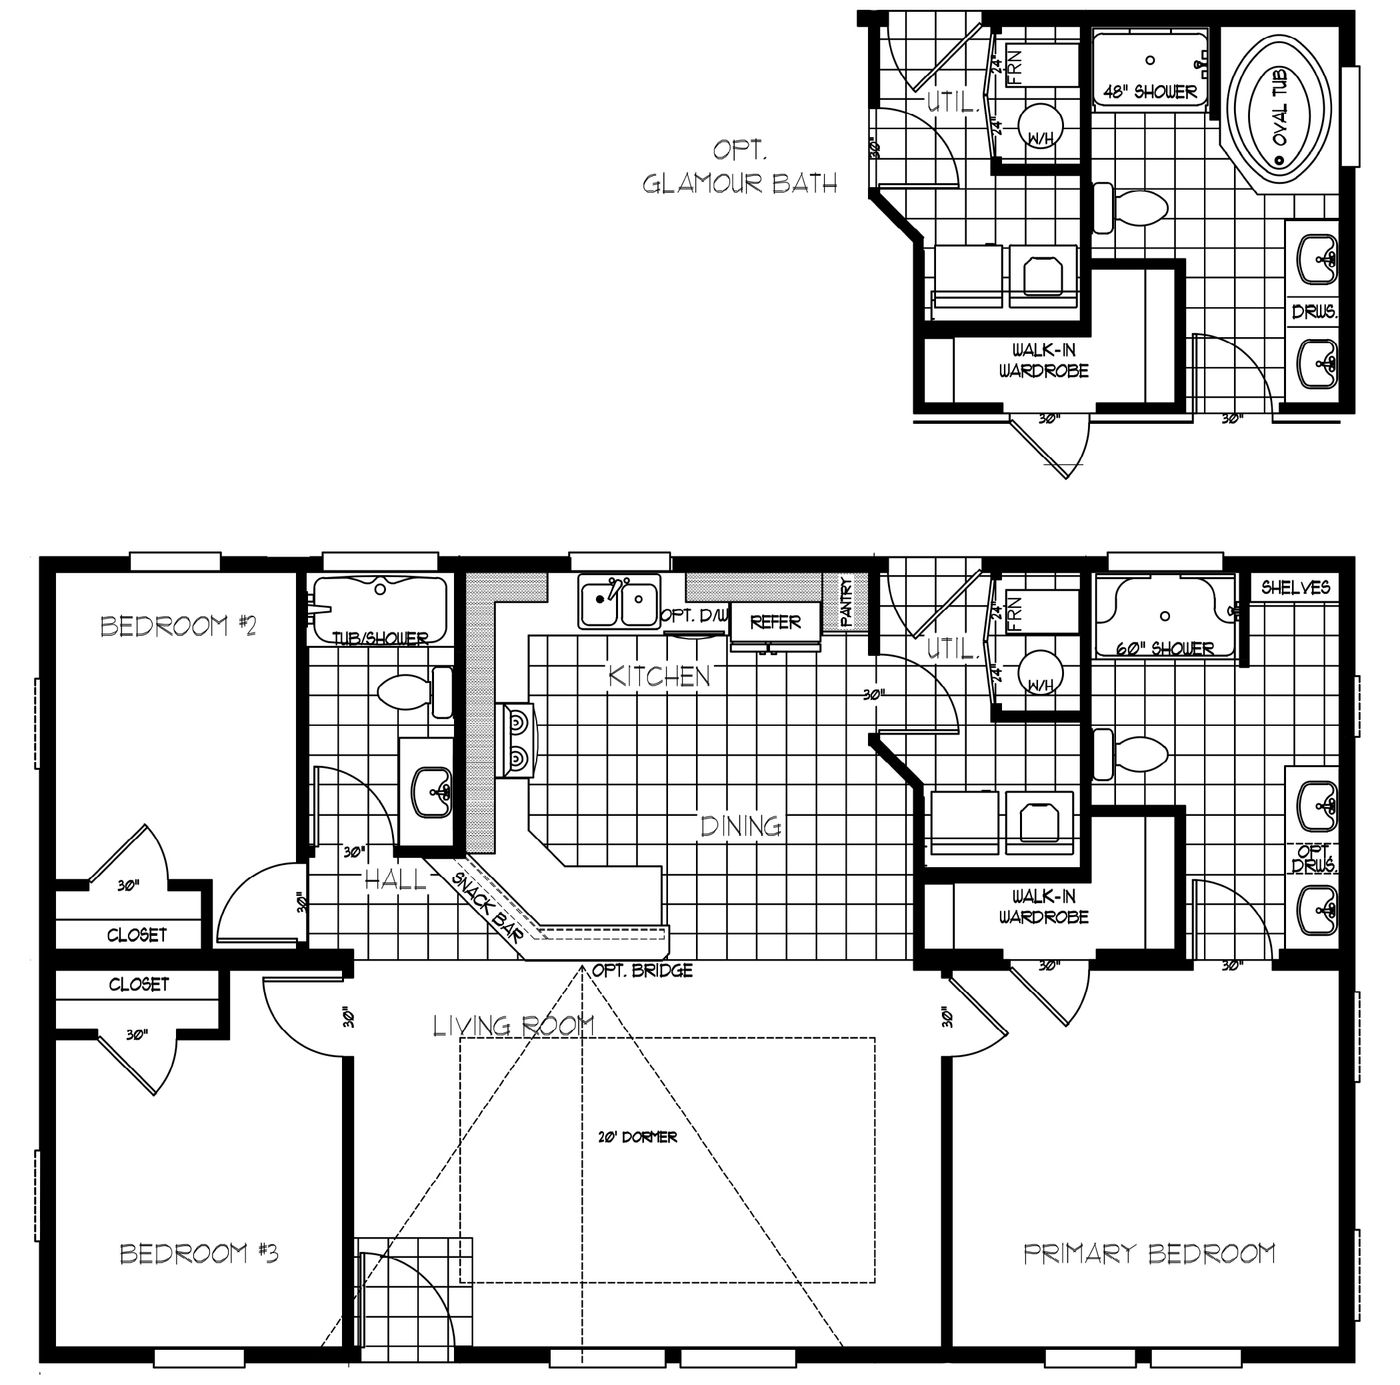 The K2744A Floor Plan. This Manufactured Mobile Home features 3 bedrooms and 2 baths.